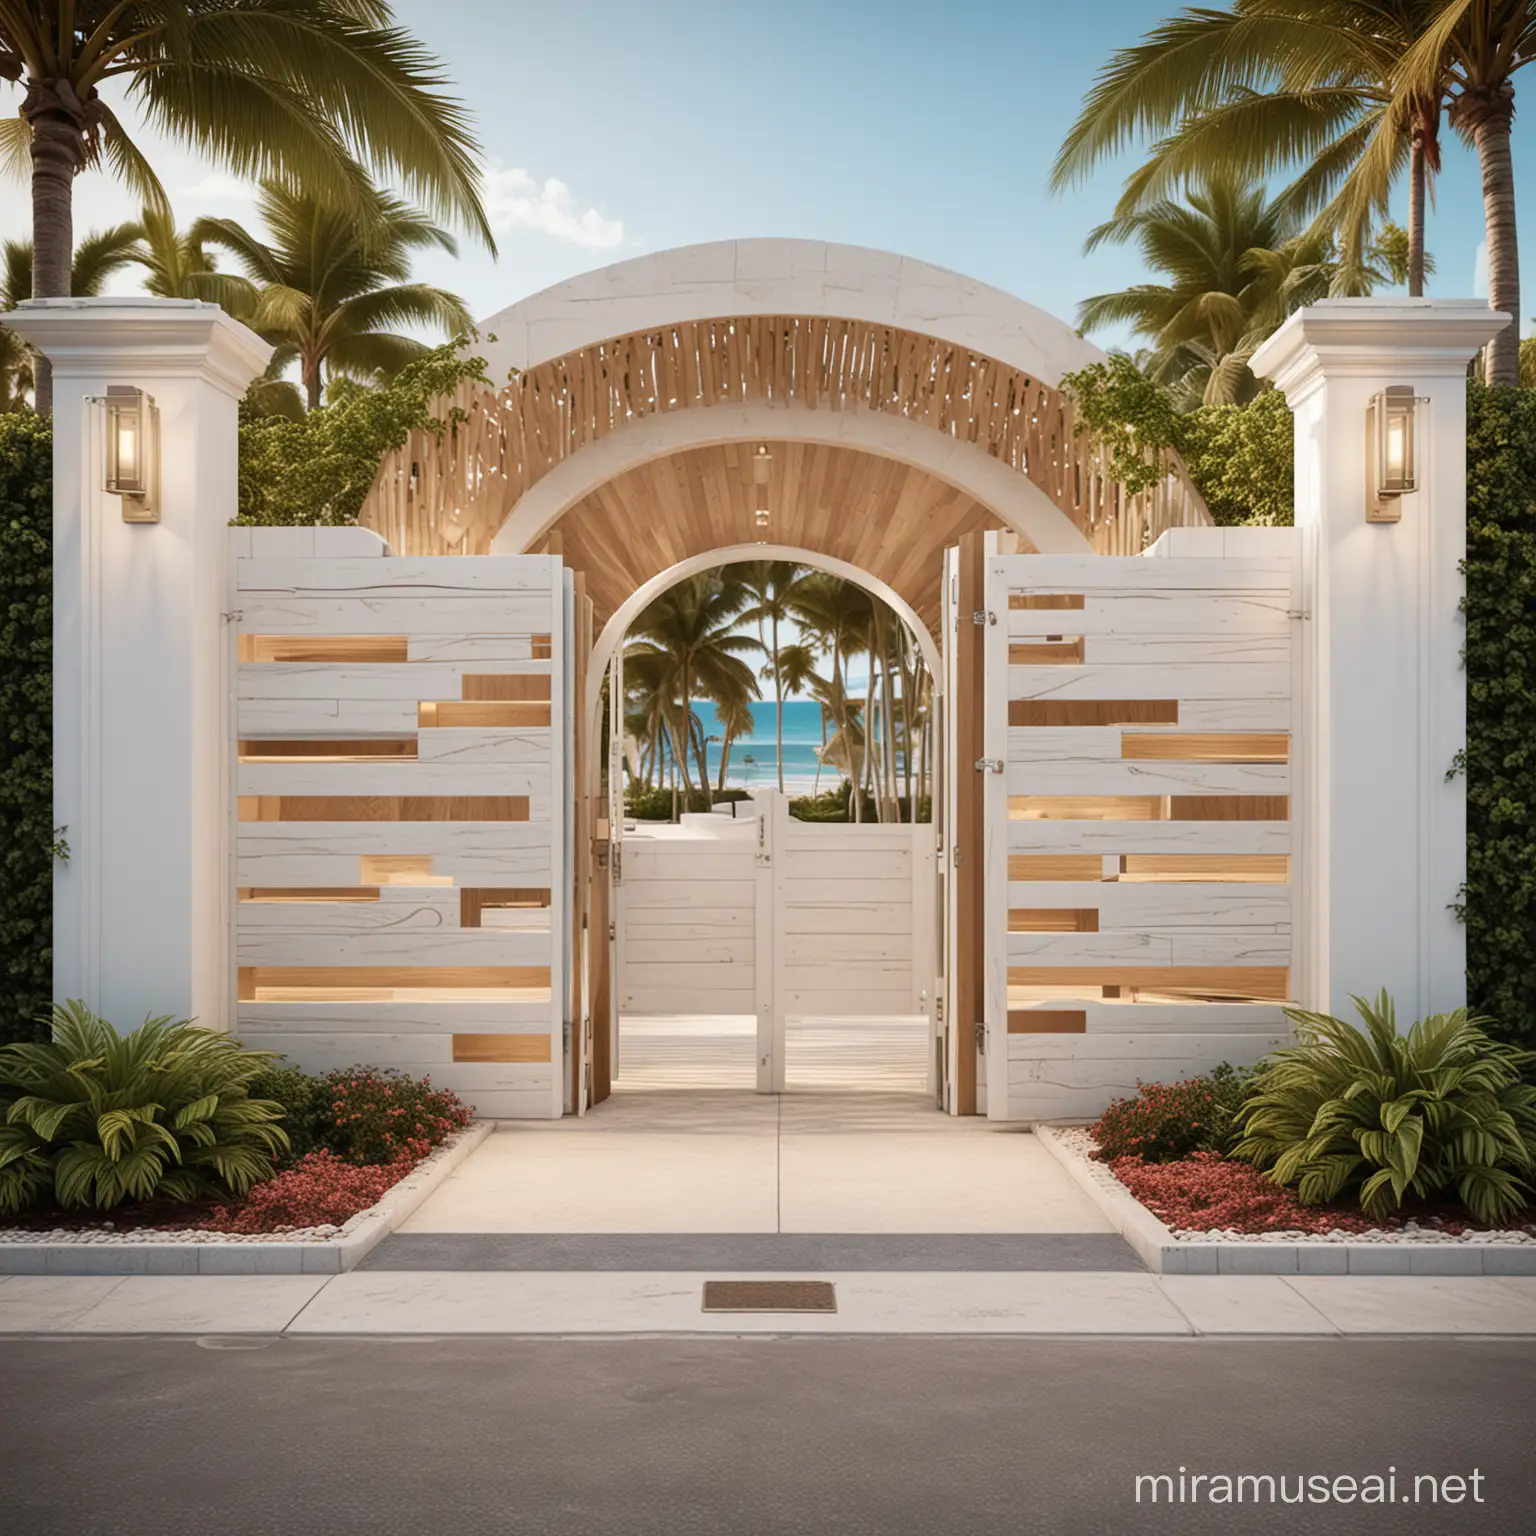 Luxurious Beach Club VIP Gate Design with Wood Strips and White Textures